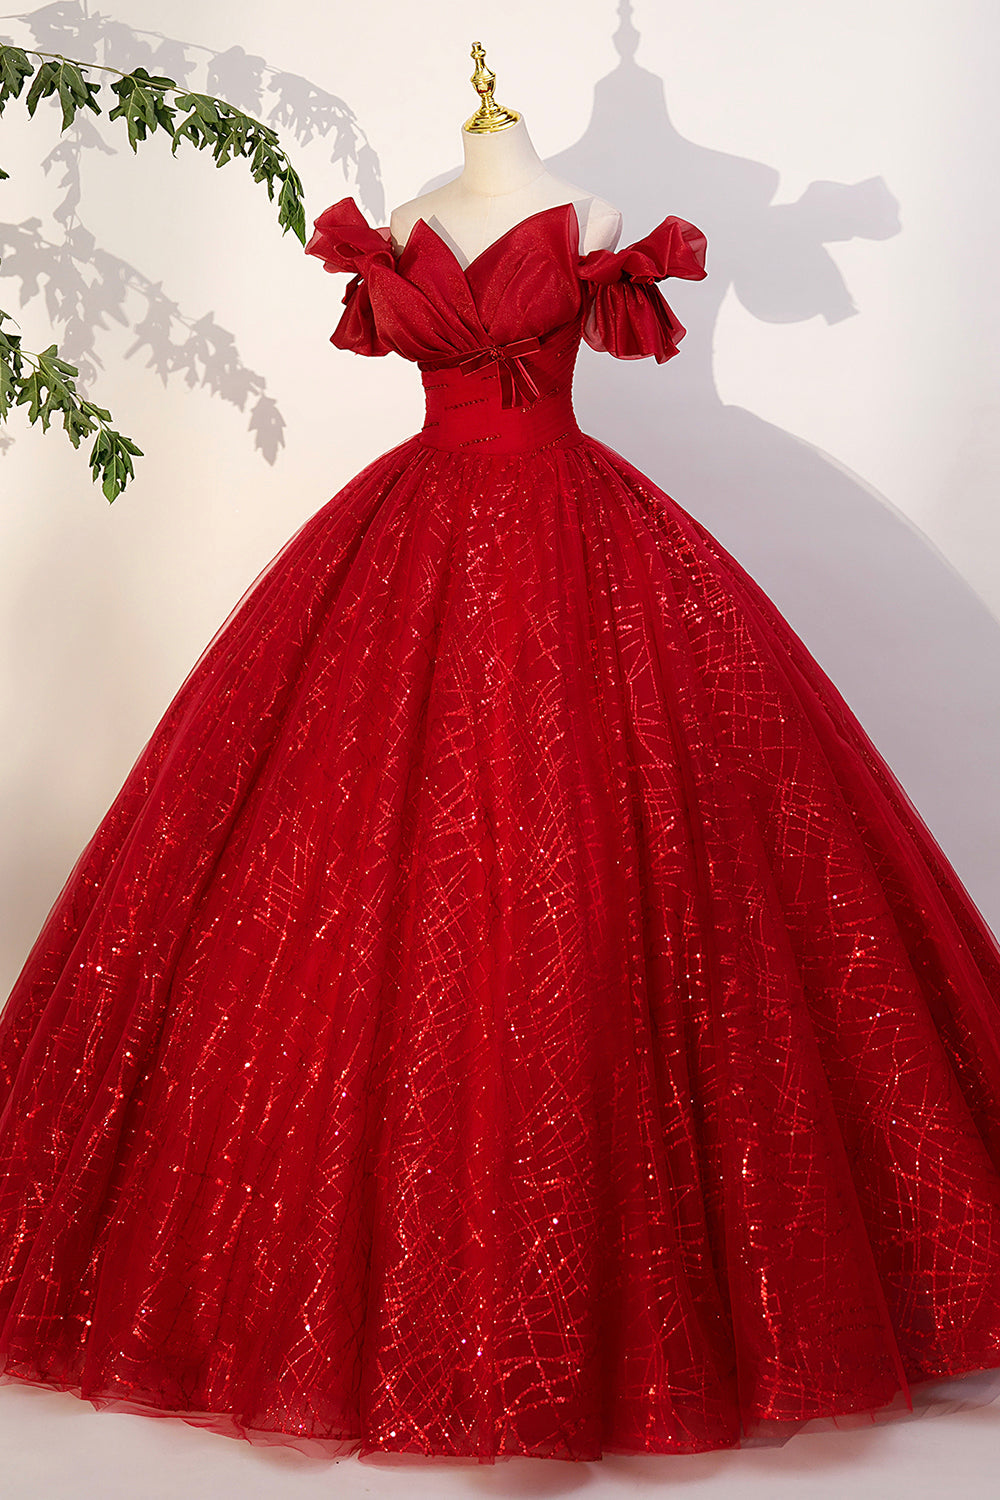 Red Tulle Sequins Long Formal Dress Outfits For Girls, Off the Shoulder Evening Dress